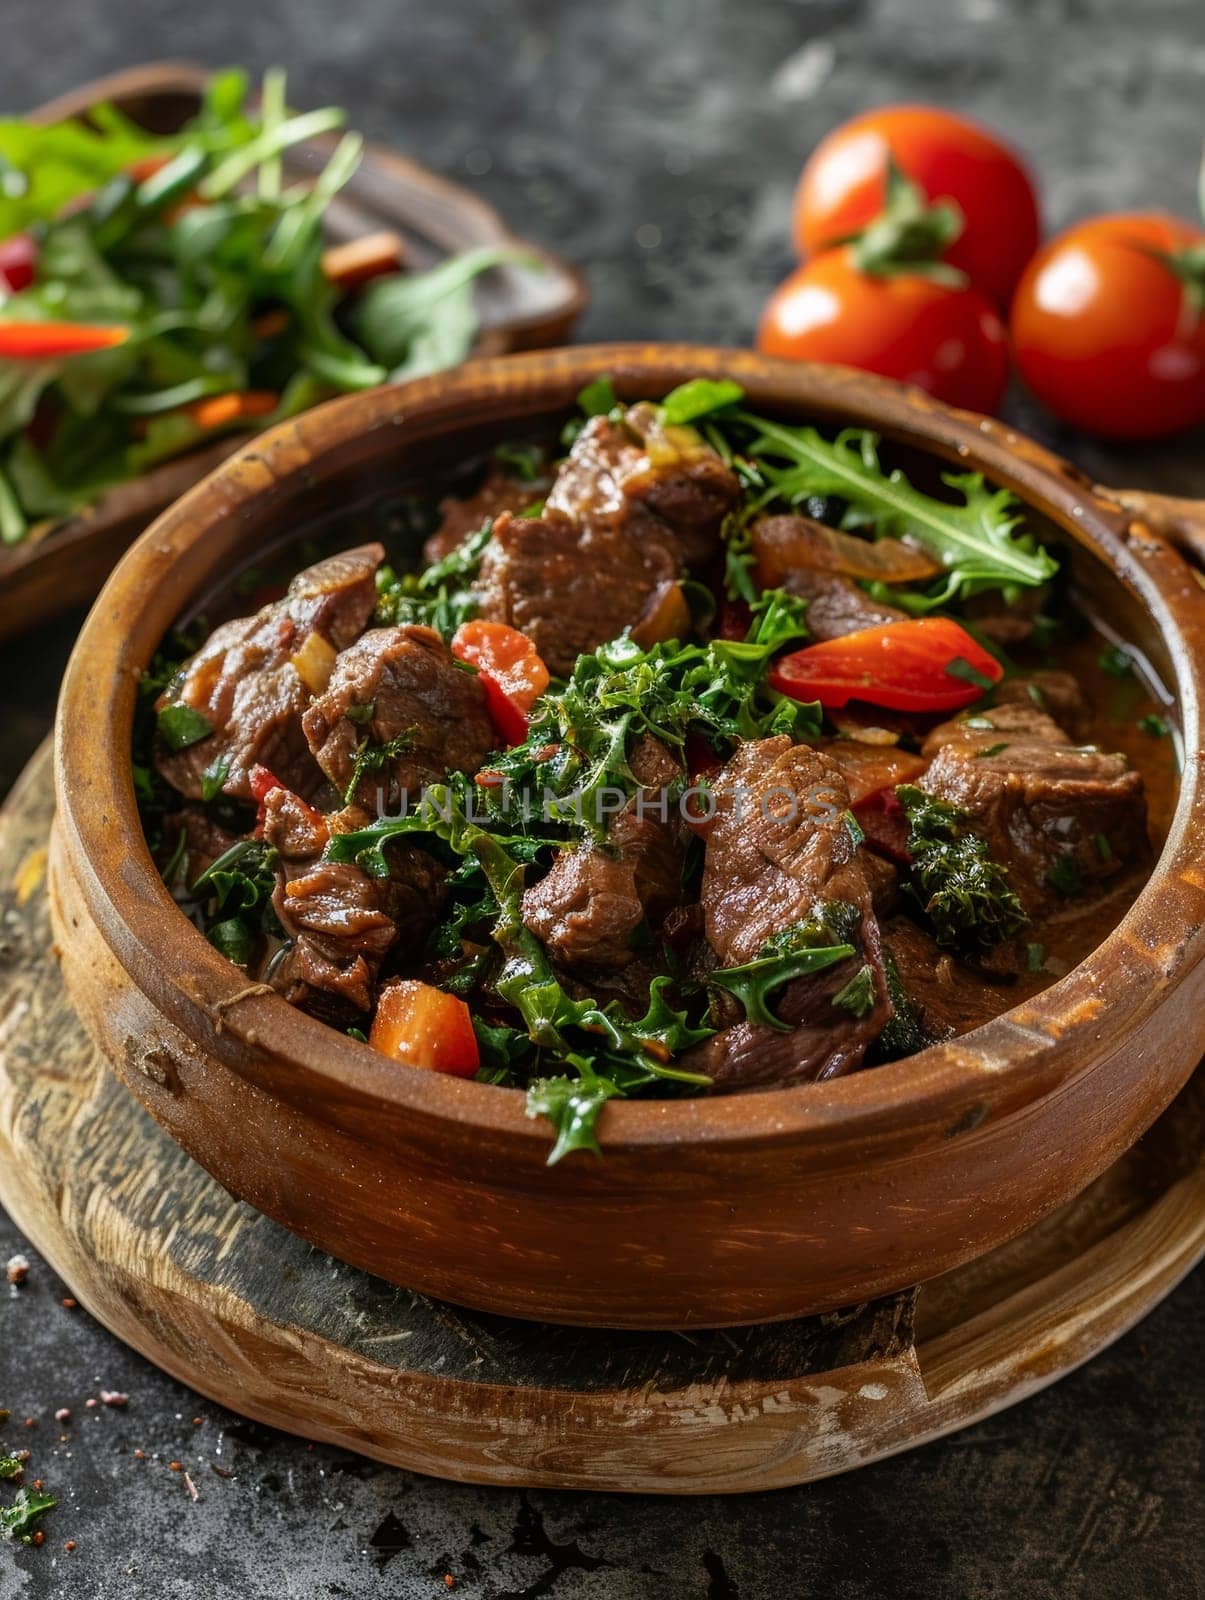 Authentic Malagasy romazava, a beef stew with mixed greens and tomatoes, served in a traditional clay pot. This rustic and flavorful dish represents the rich culinary heritage of Madagascar. by sfinks